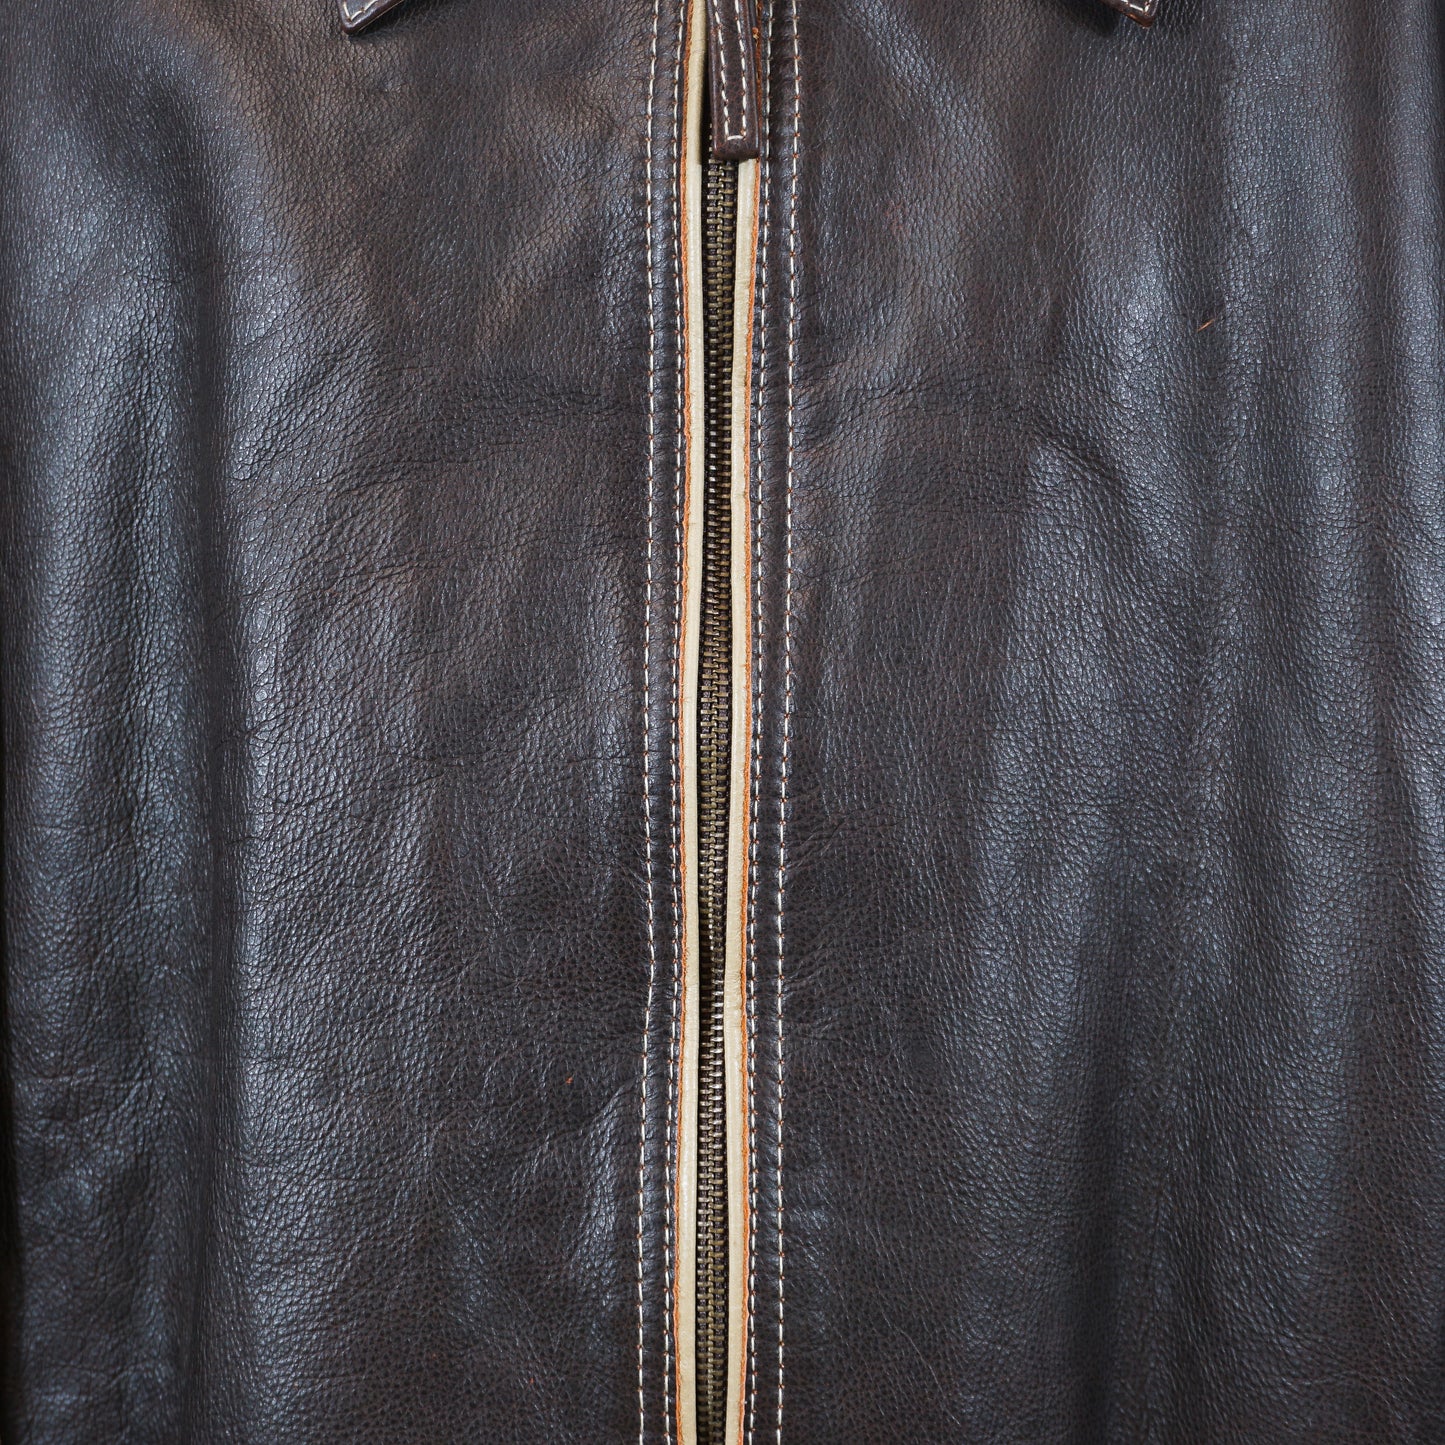 Y2K 'Jays New York' Leather Collared Jacket (M/L)